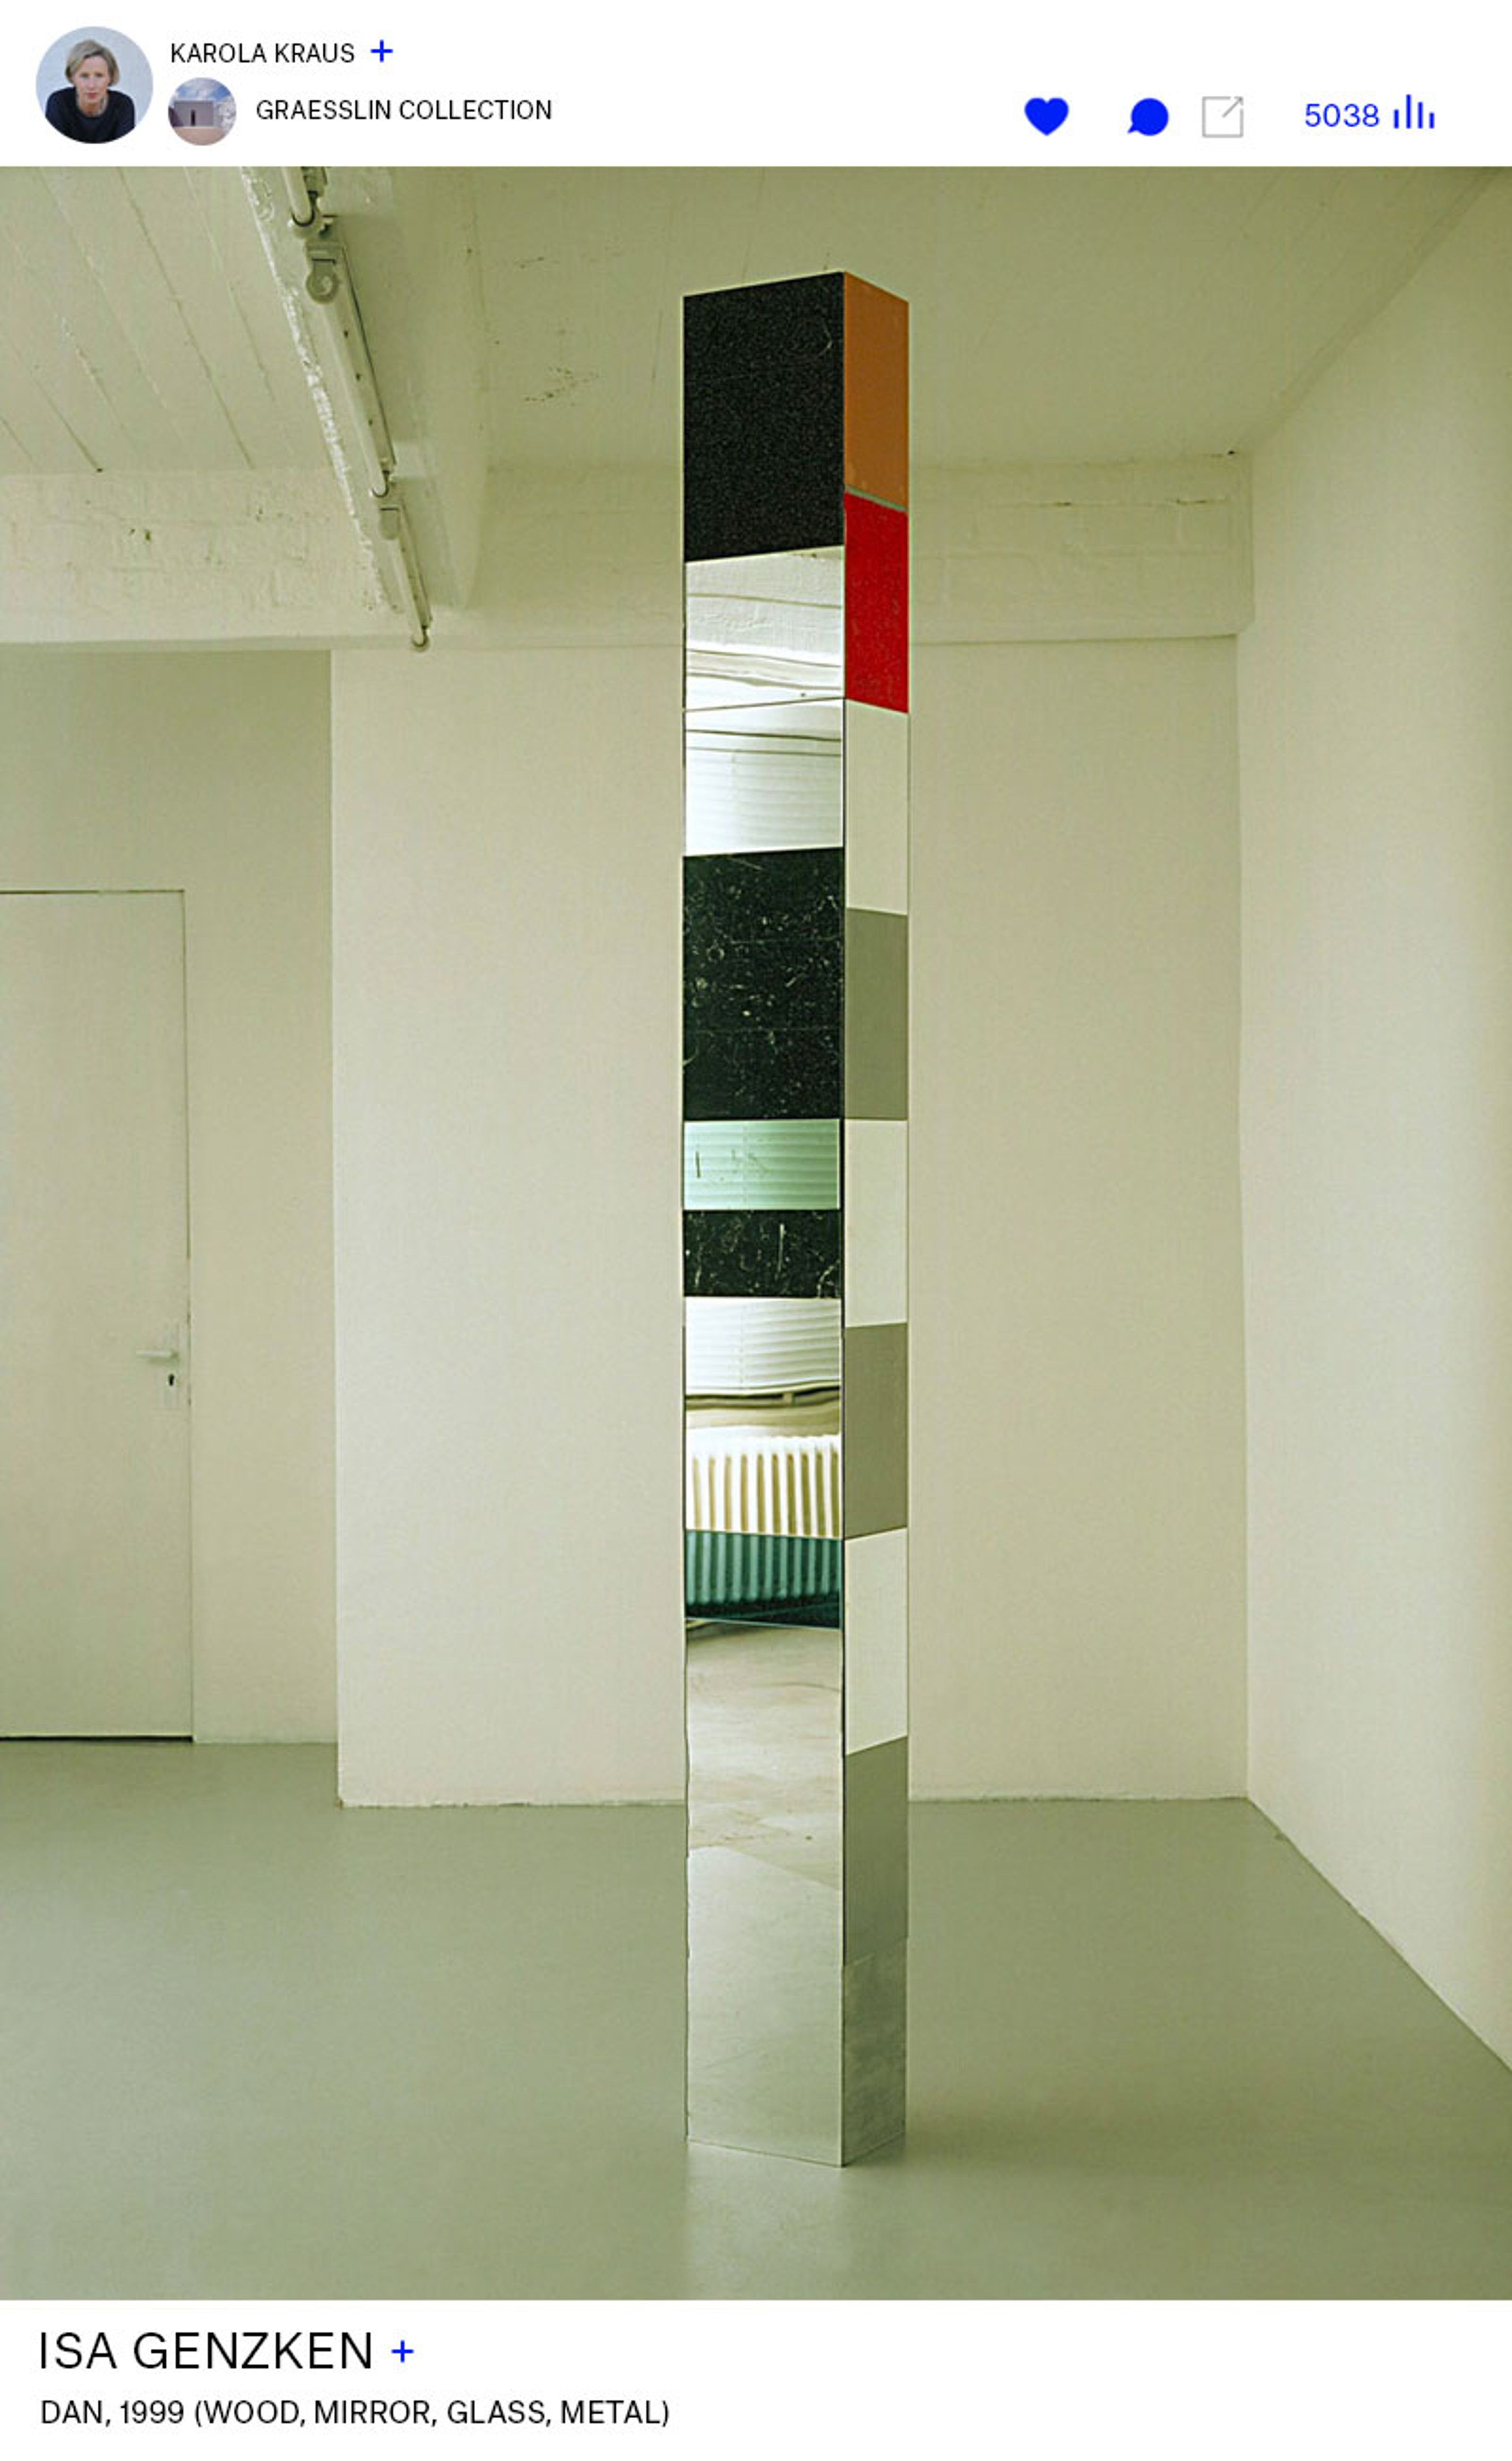 Large square column with mirrors from the Graesslin Collection